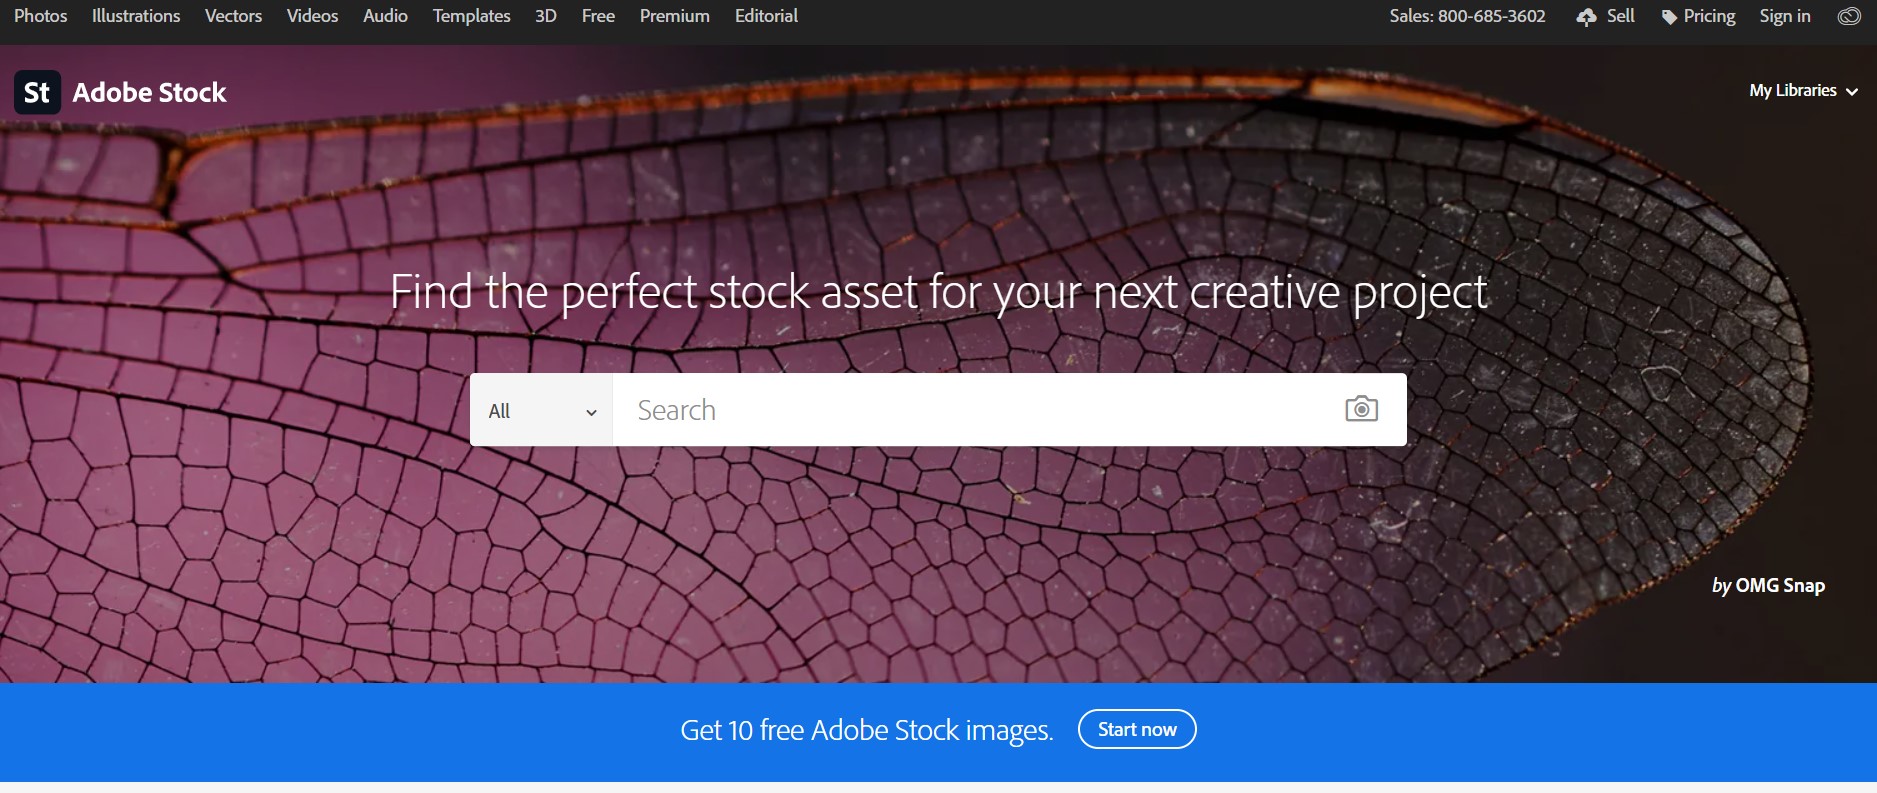 Find detailed information about Adobe Stock